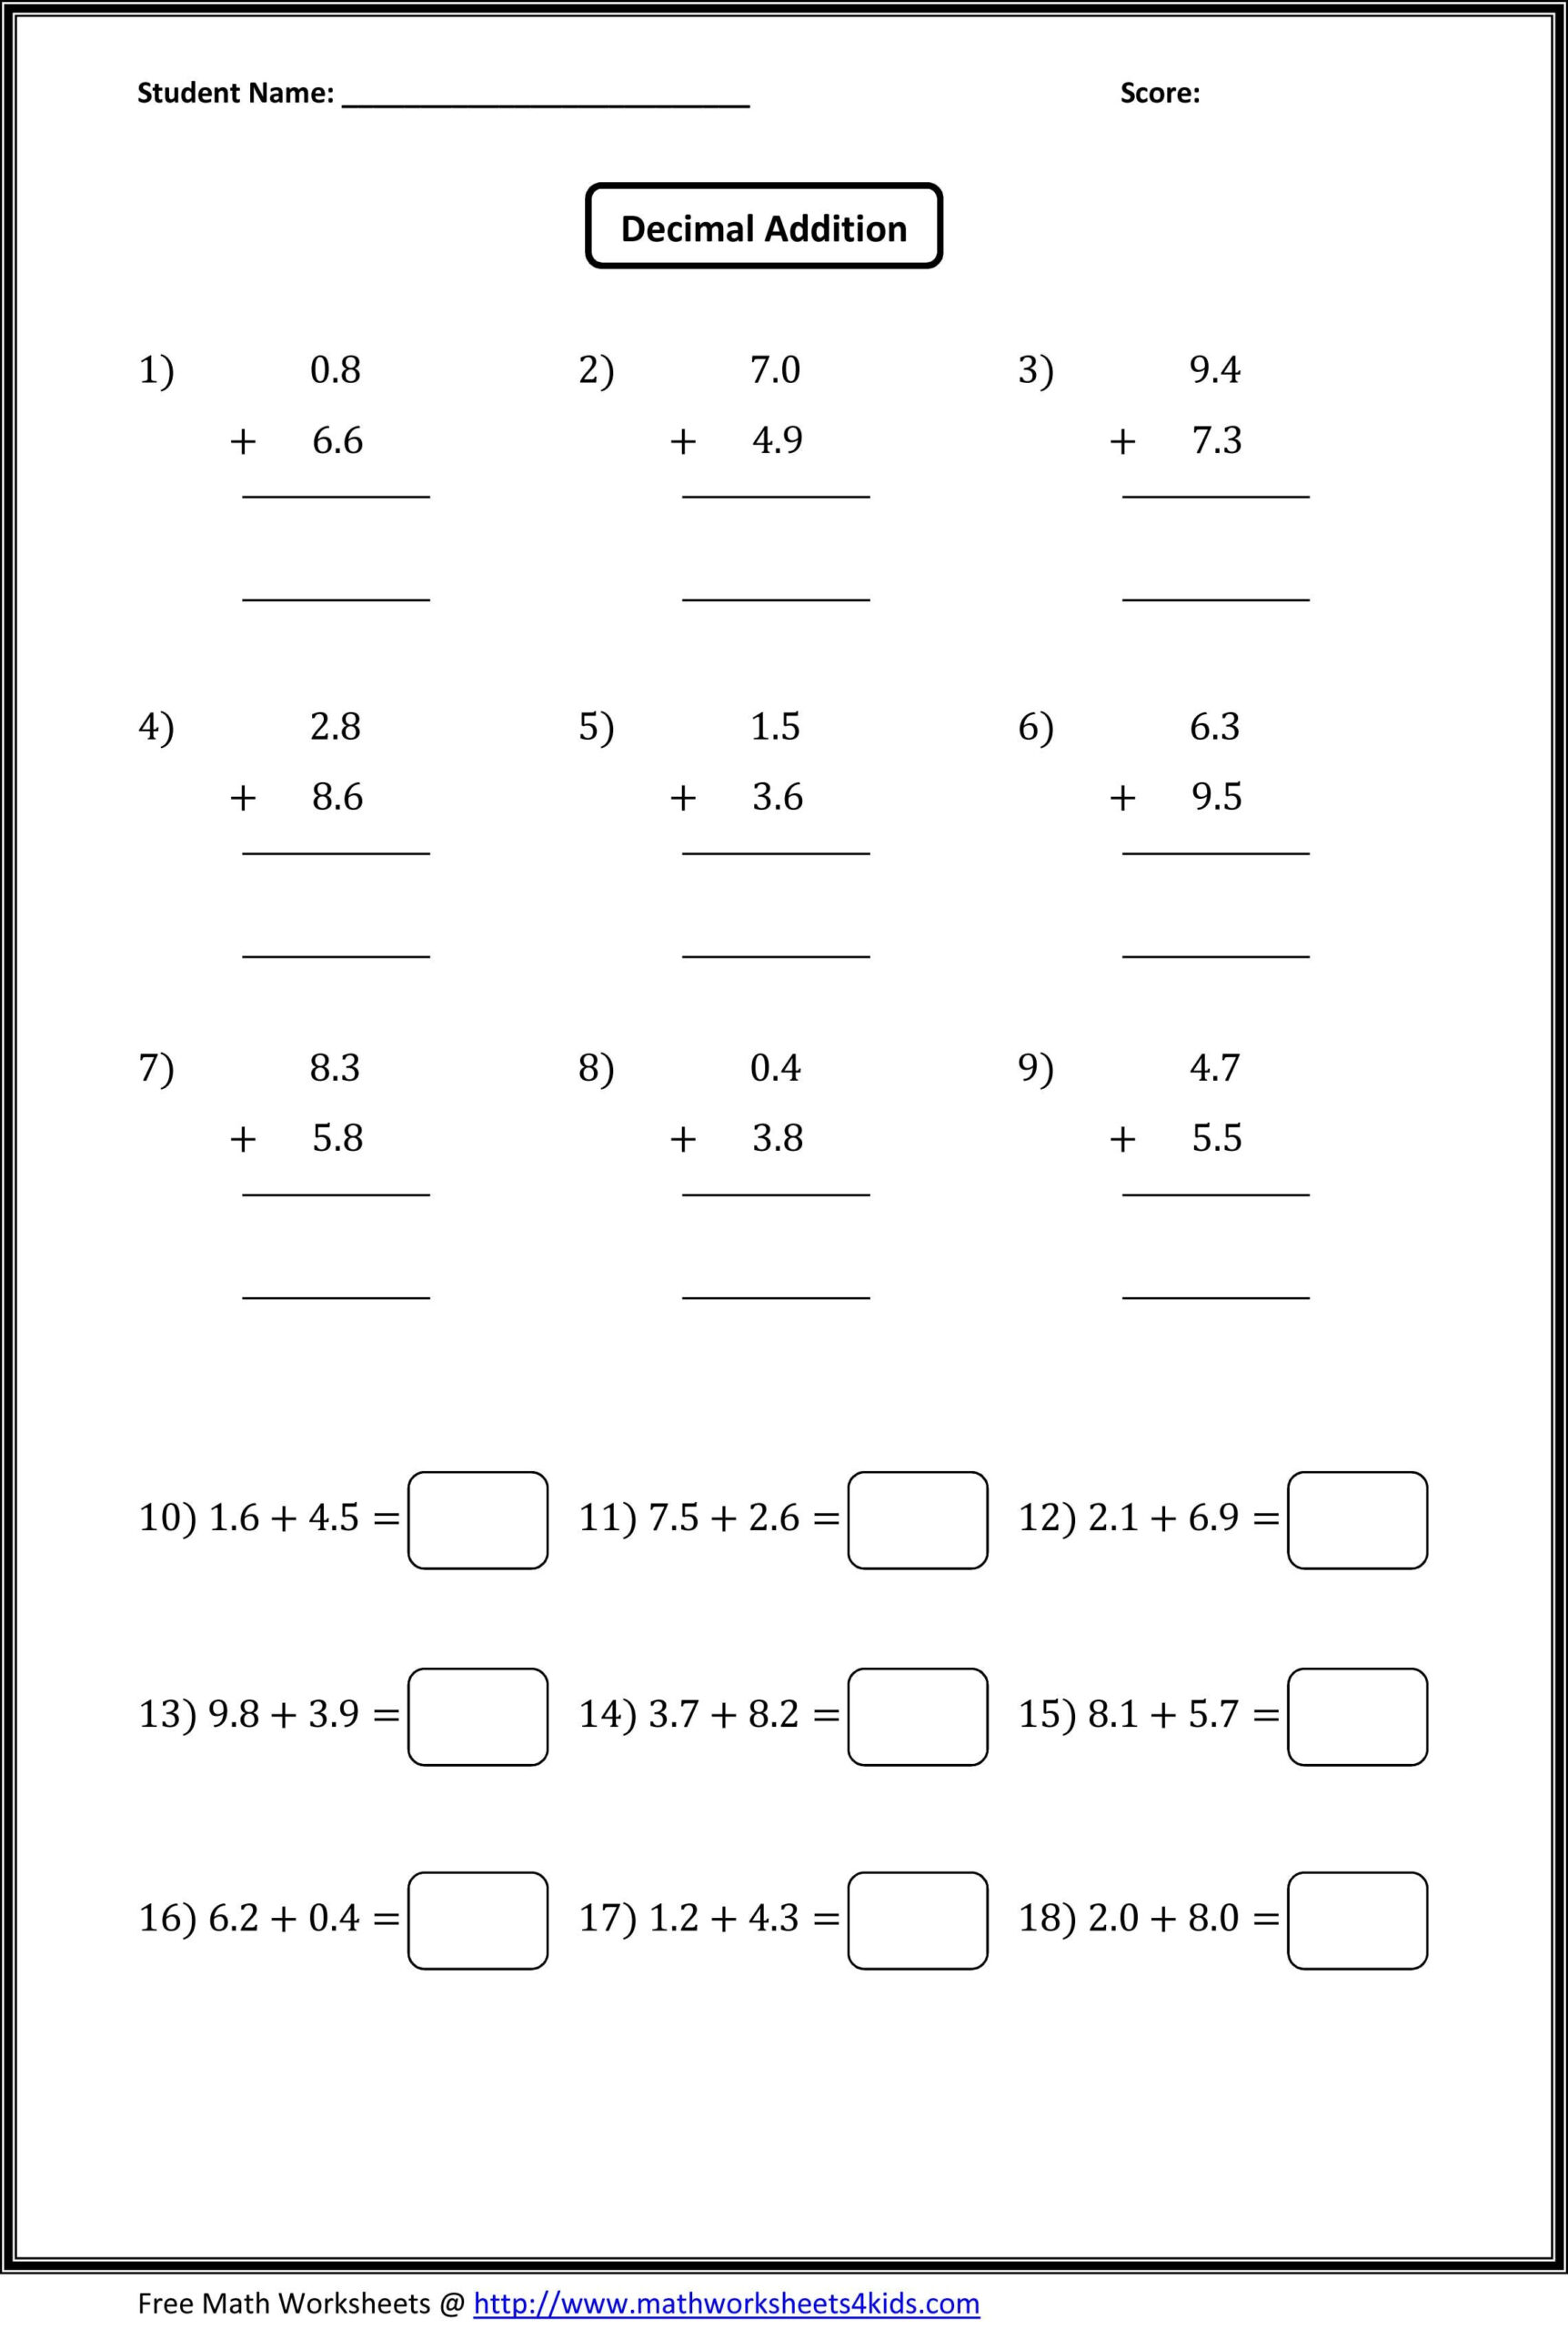 Adding And Subtracting Signed Numbers Worksheet Pdf 2022 NumbersWorksheets